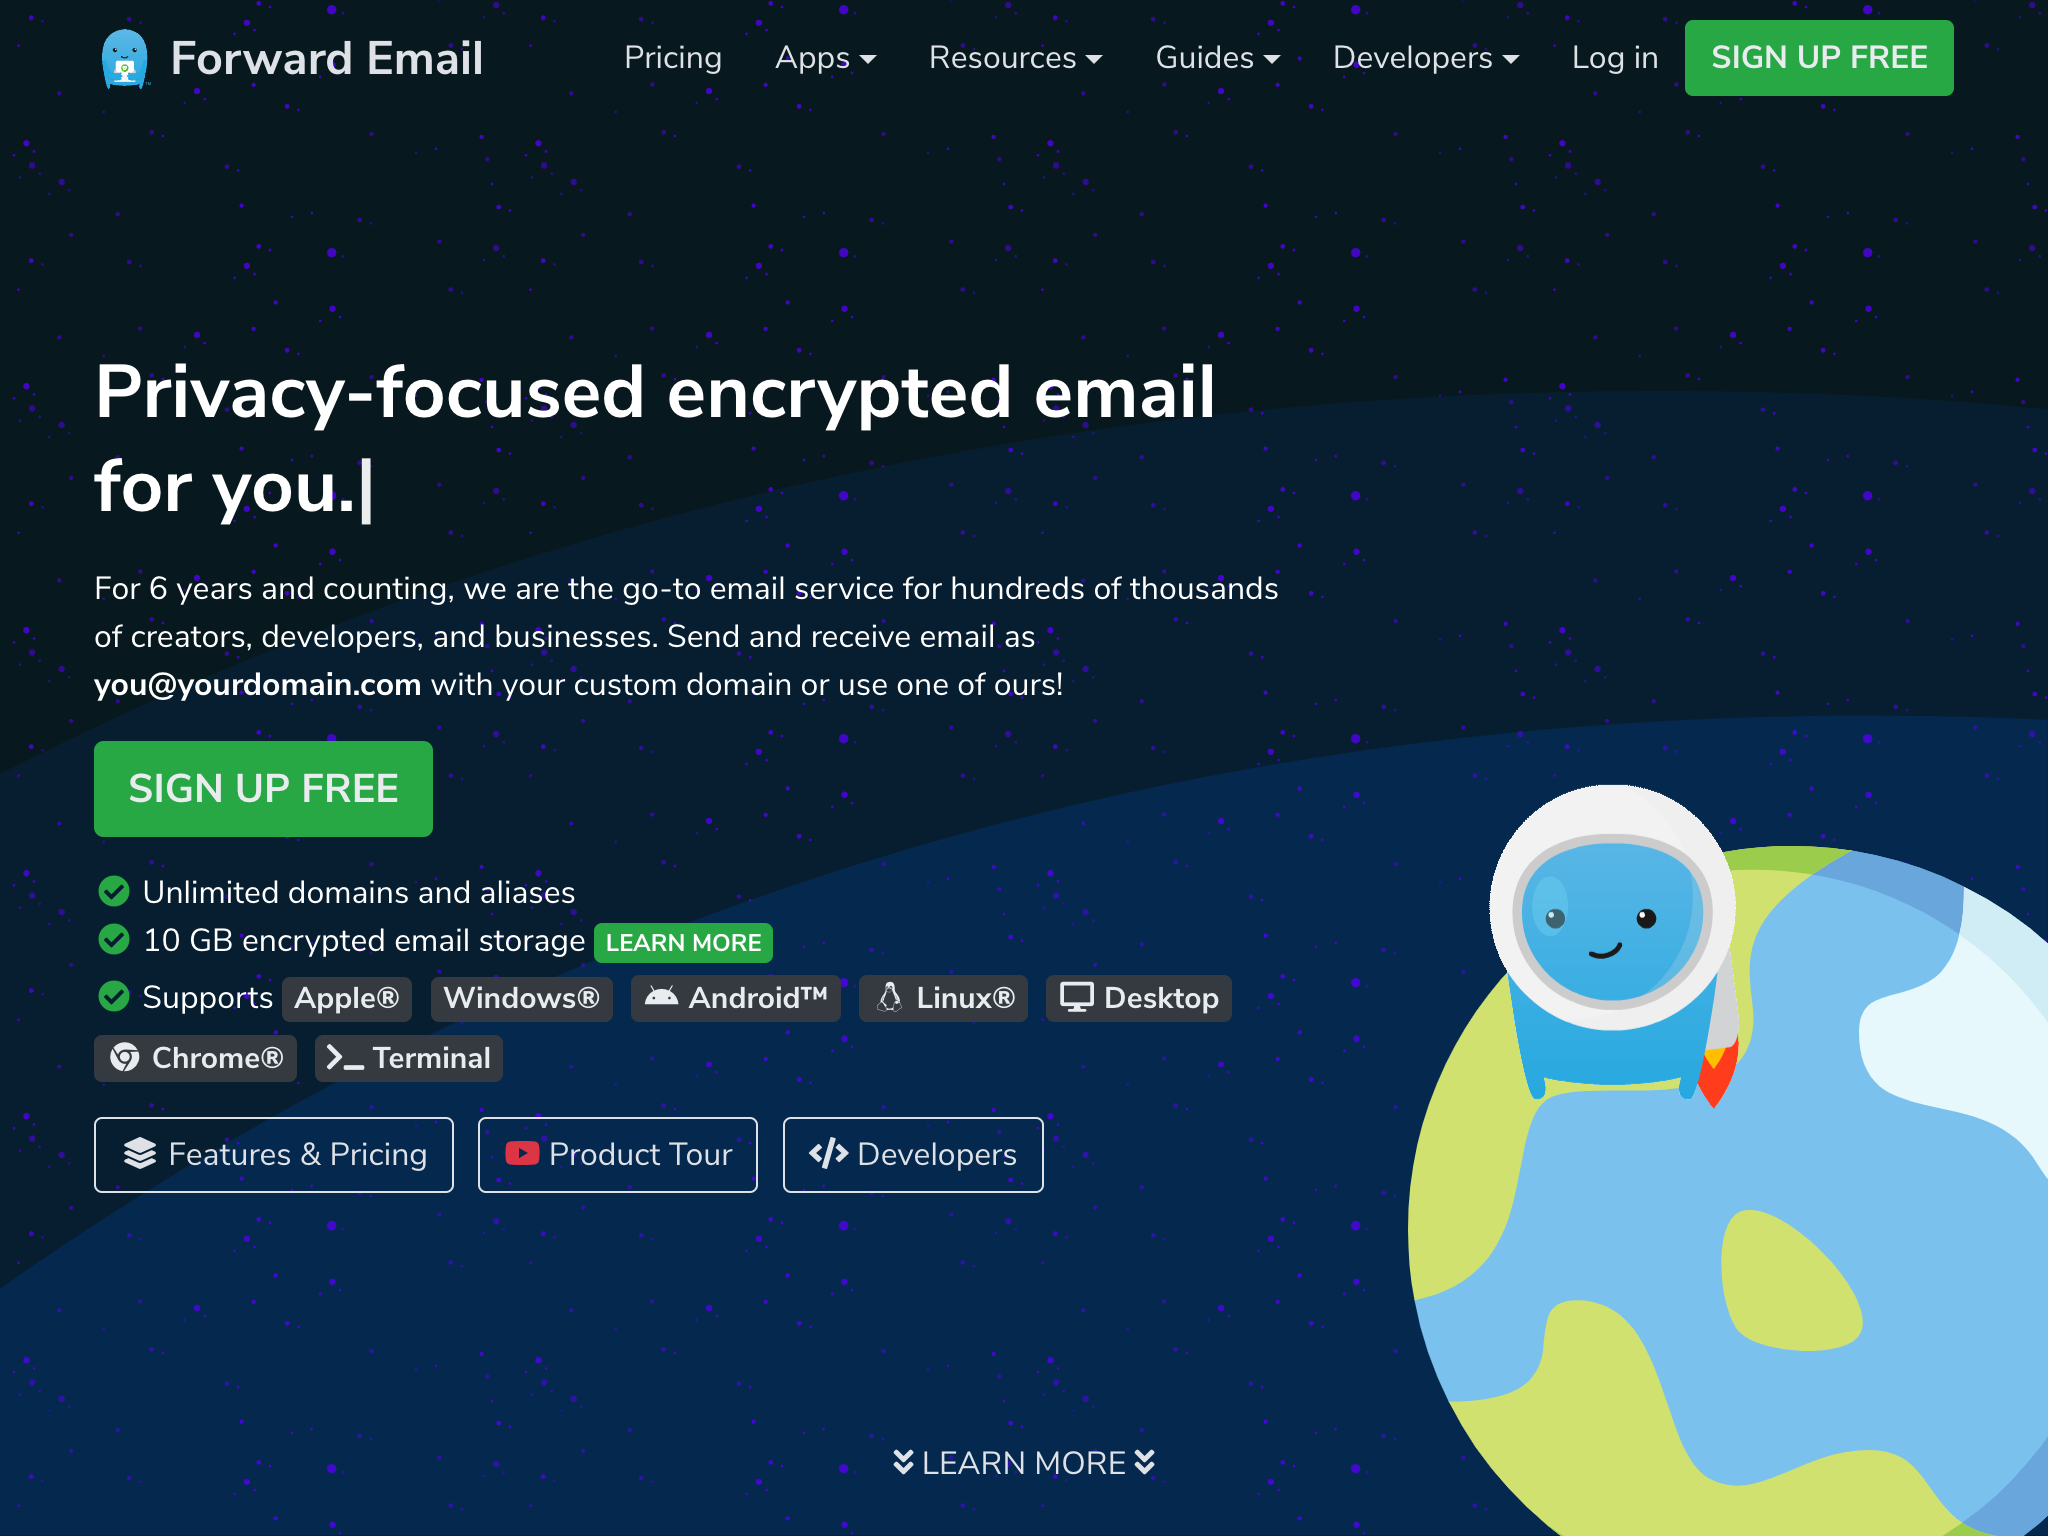 Forward Email is an open-source email server for Apple.